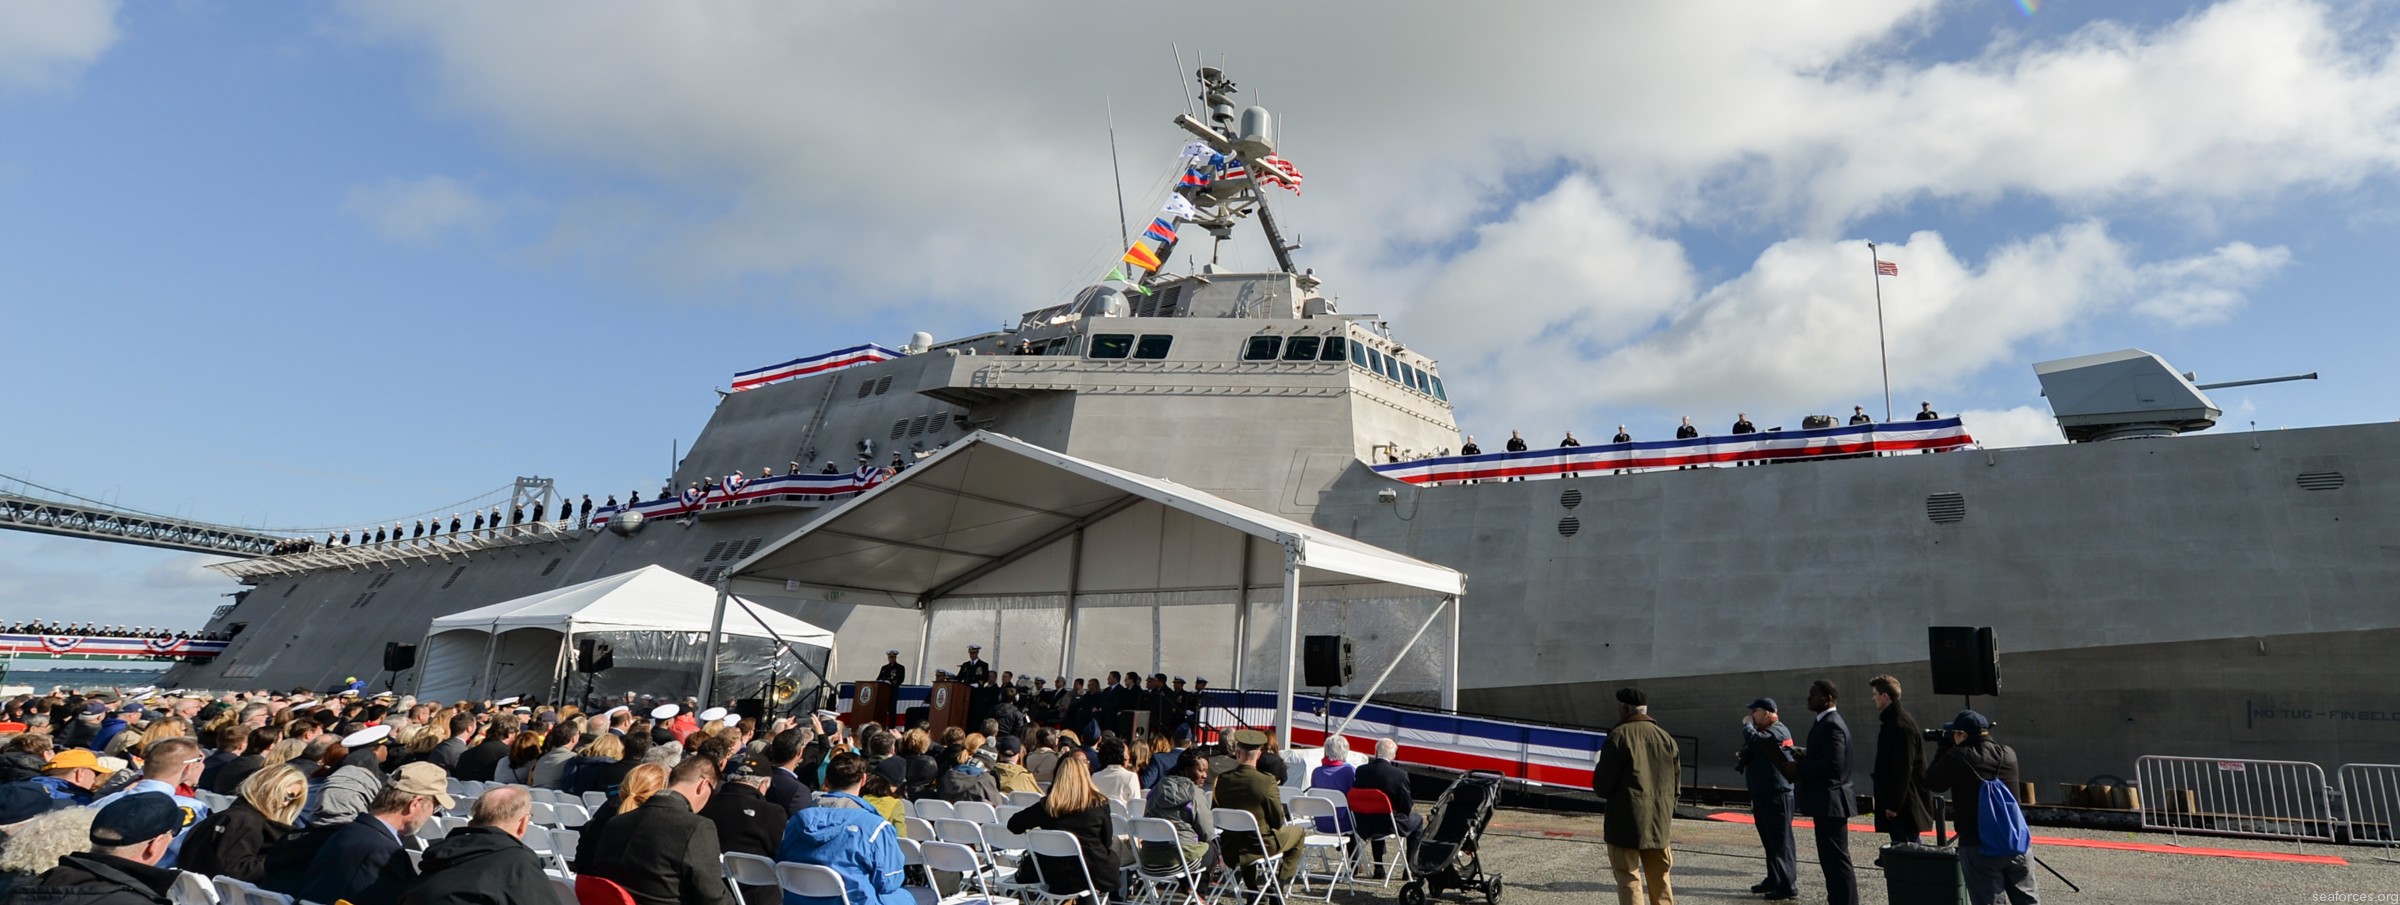 lcs-16 uss tulsa independence class littoral combat ship navy 09 commissioning ceremony san francisco